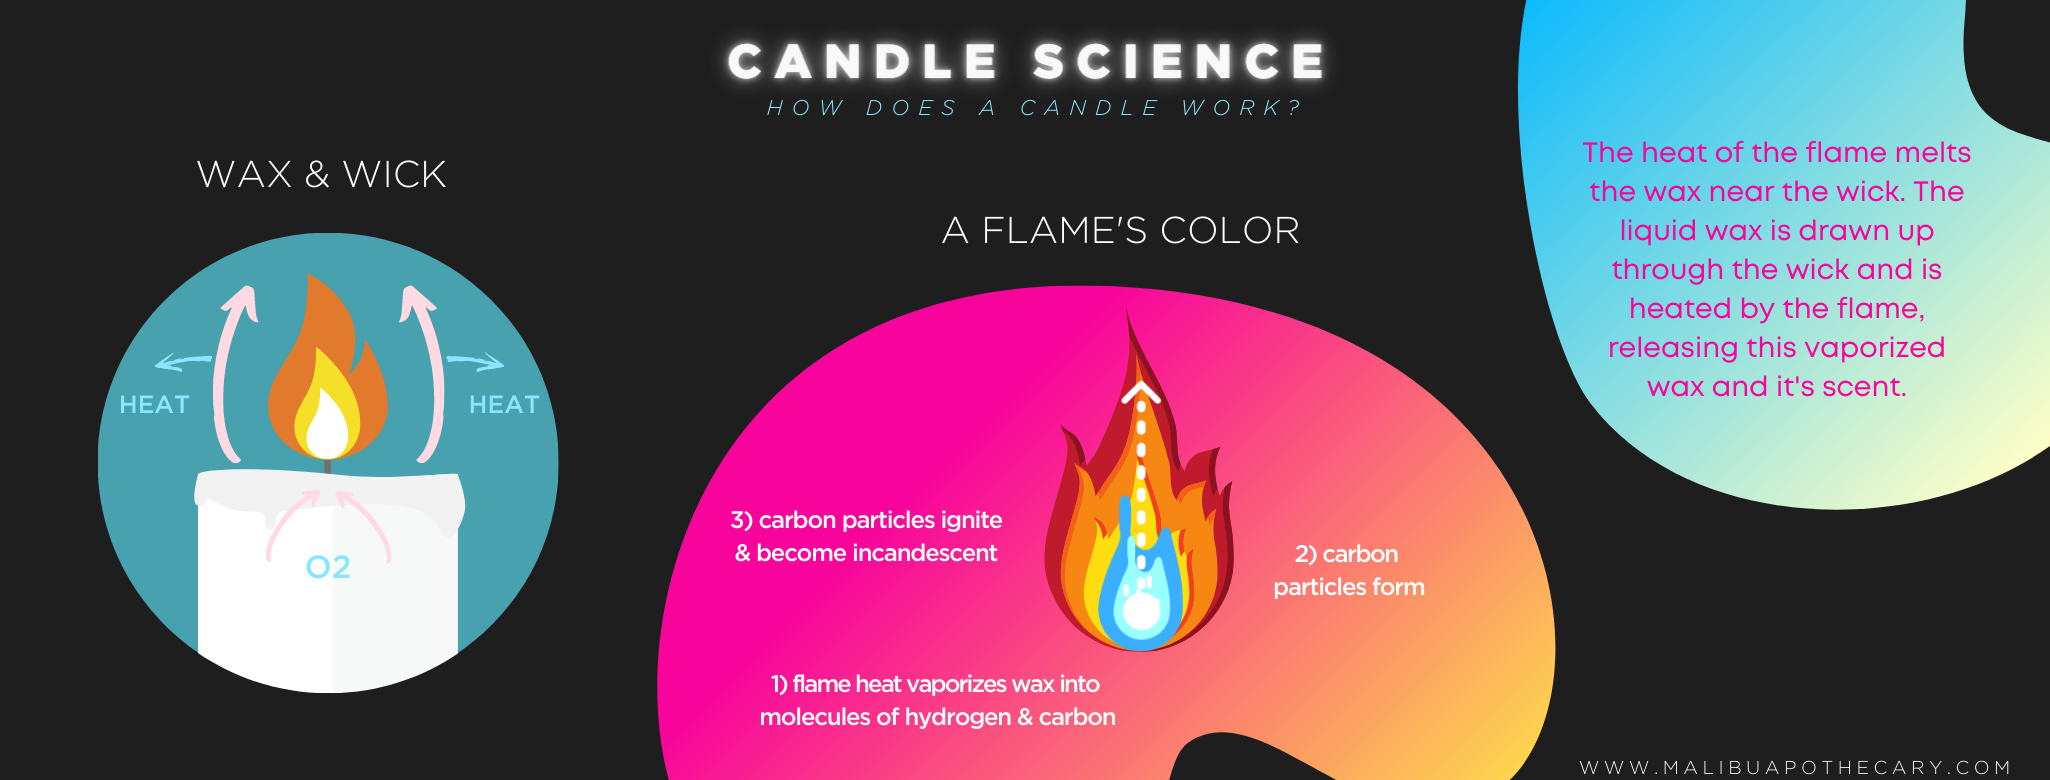 Candle Making 101: Hot Throw - CandleScience